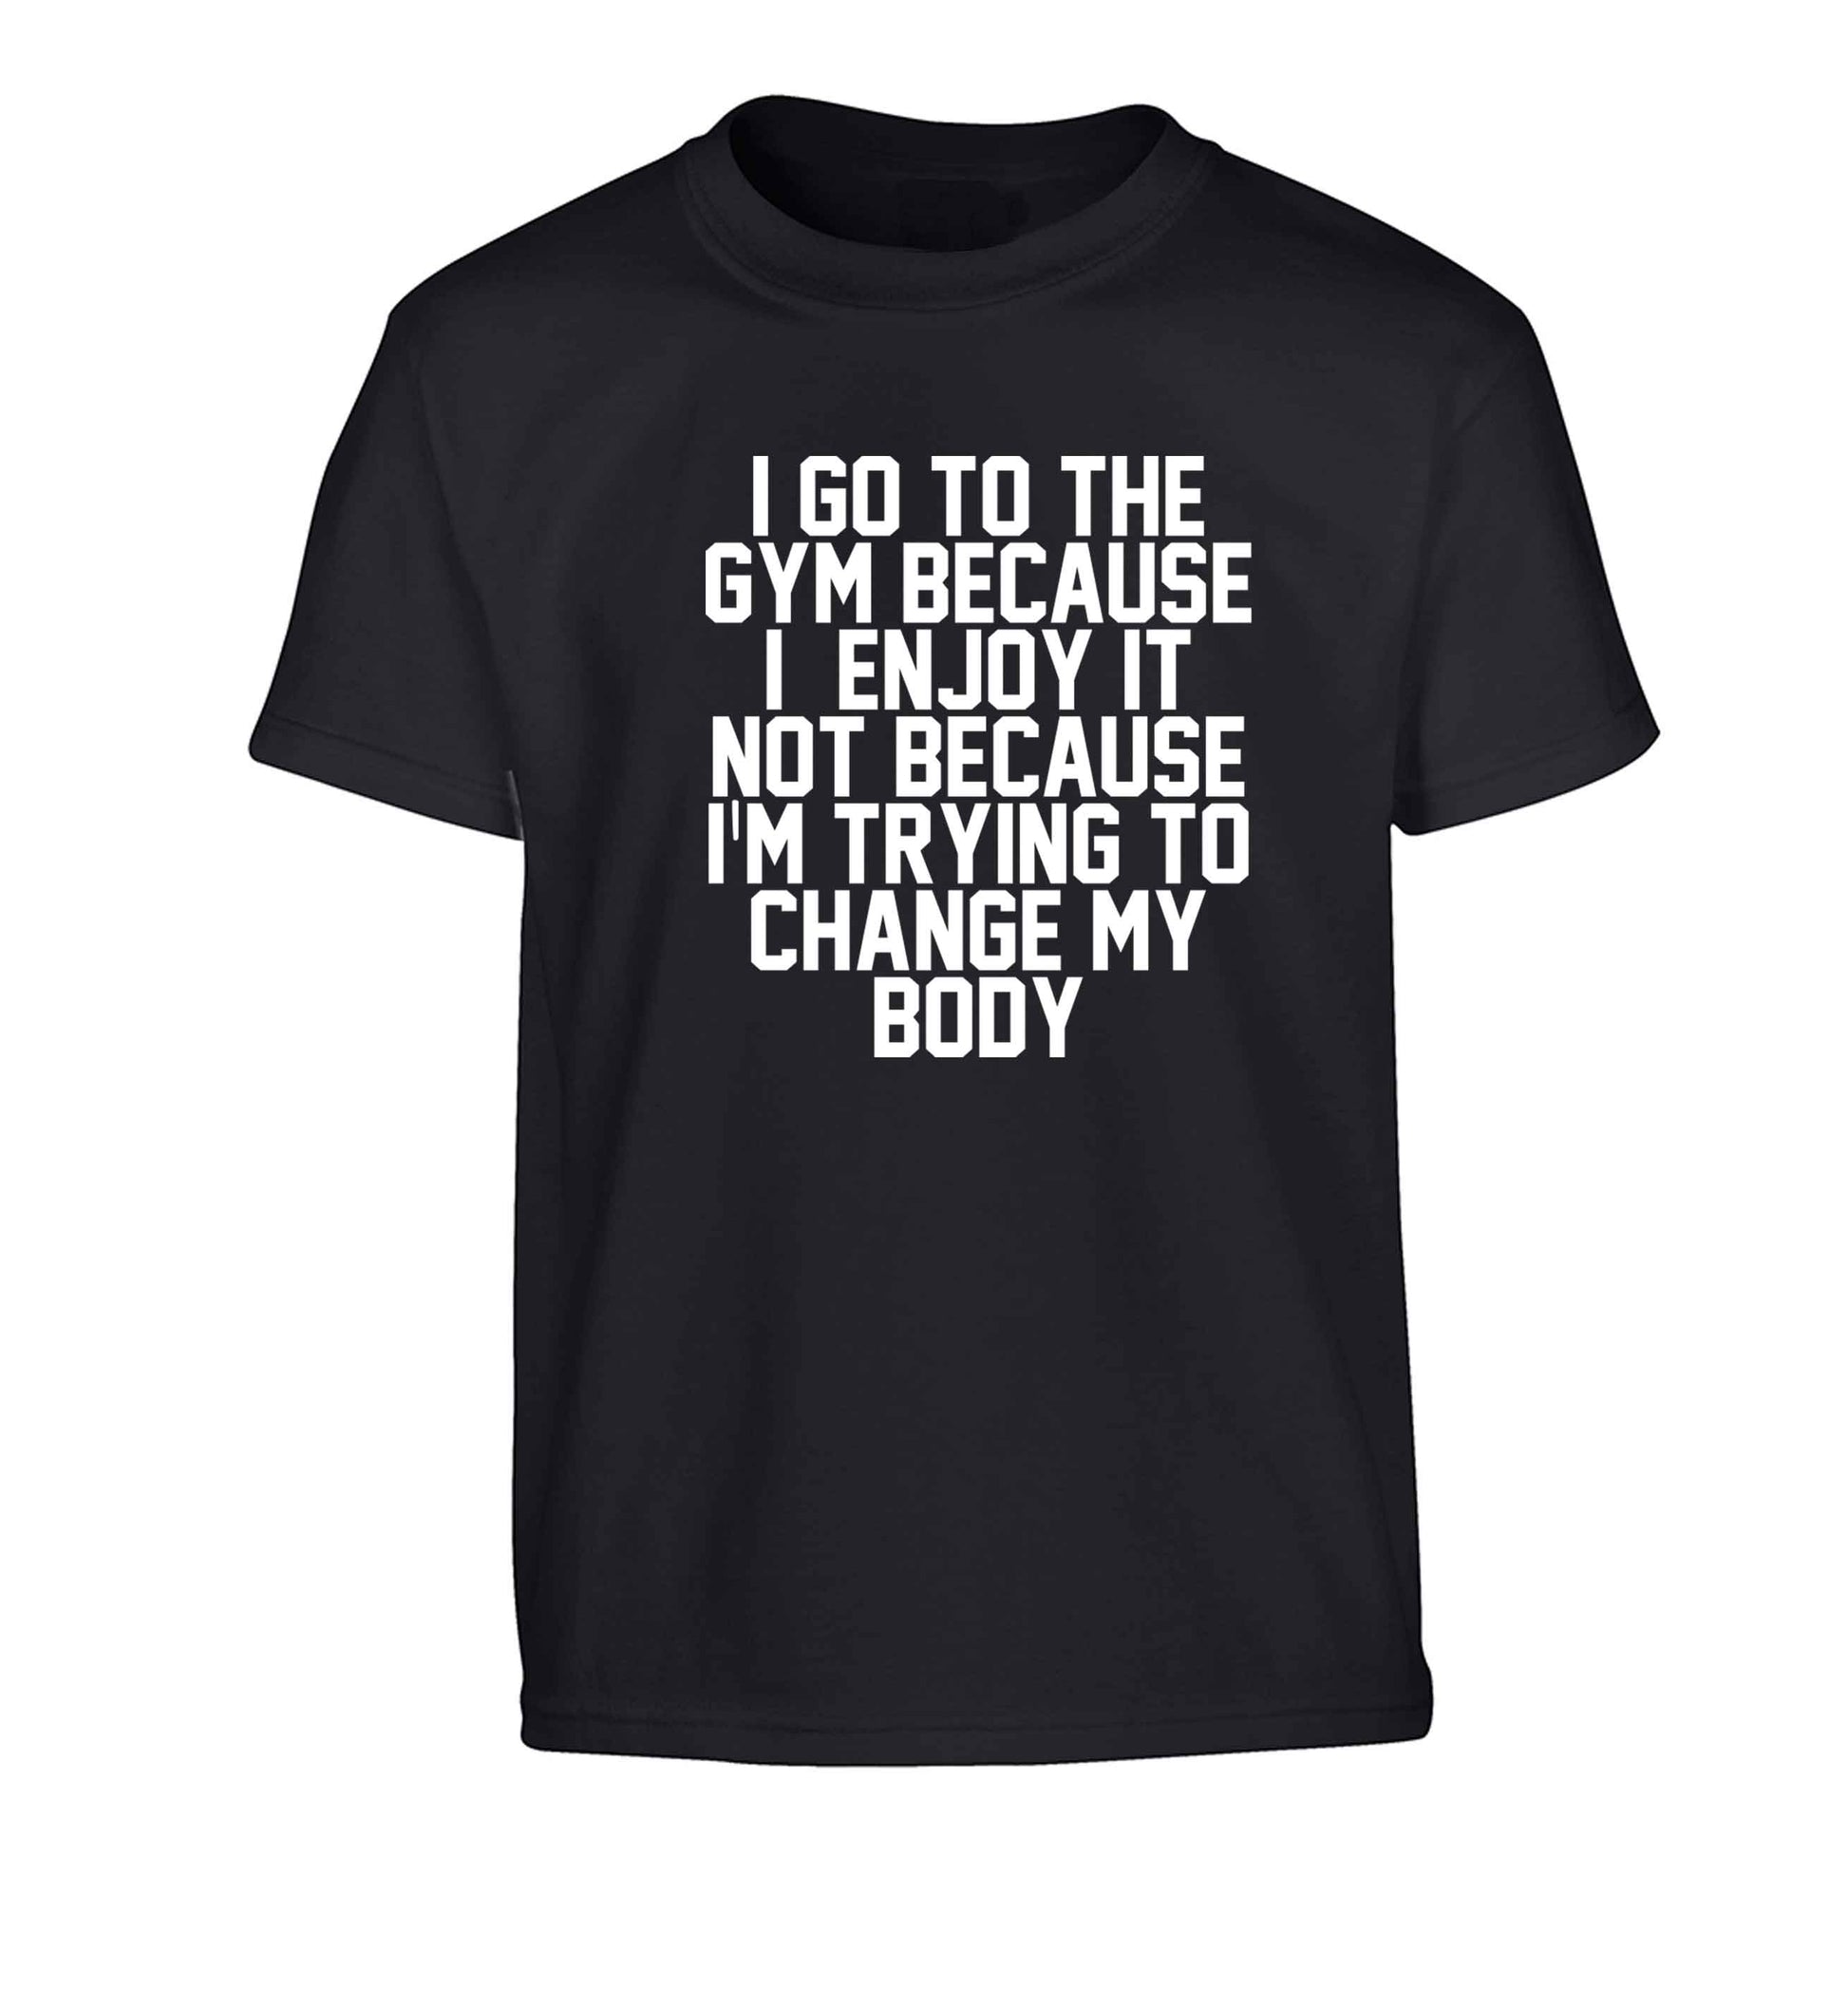 I go to the gym because I enjoy it not because I'm trying to change my body Children's black Tshirt 12-13 Years